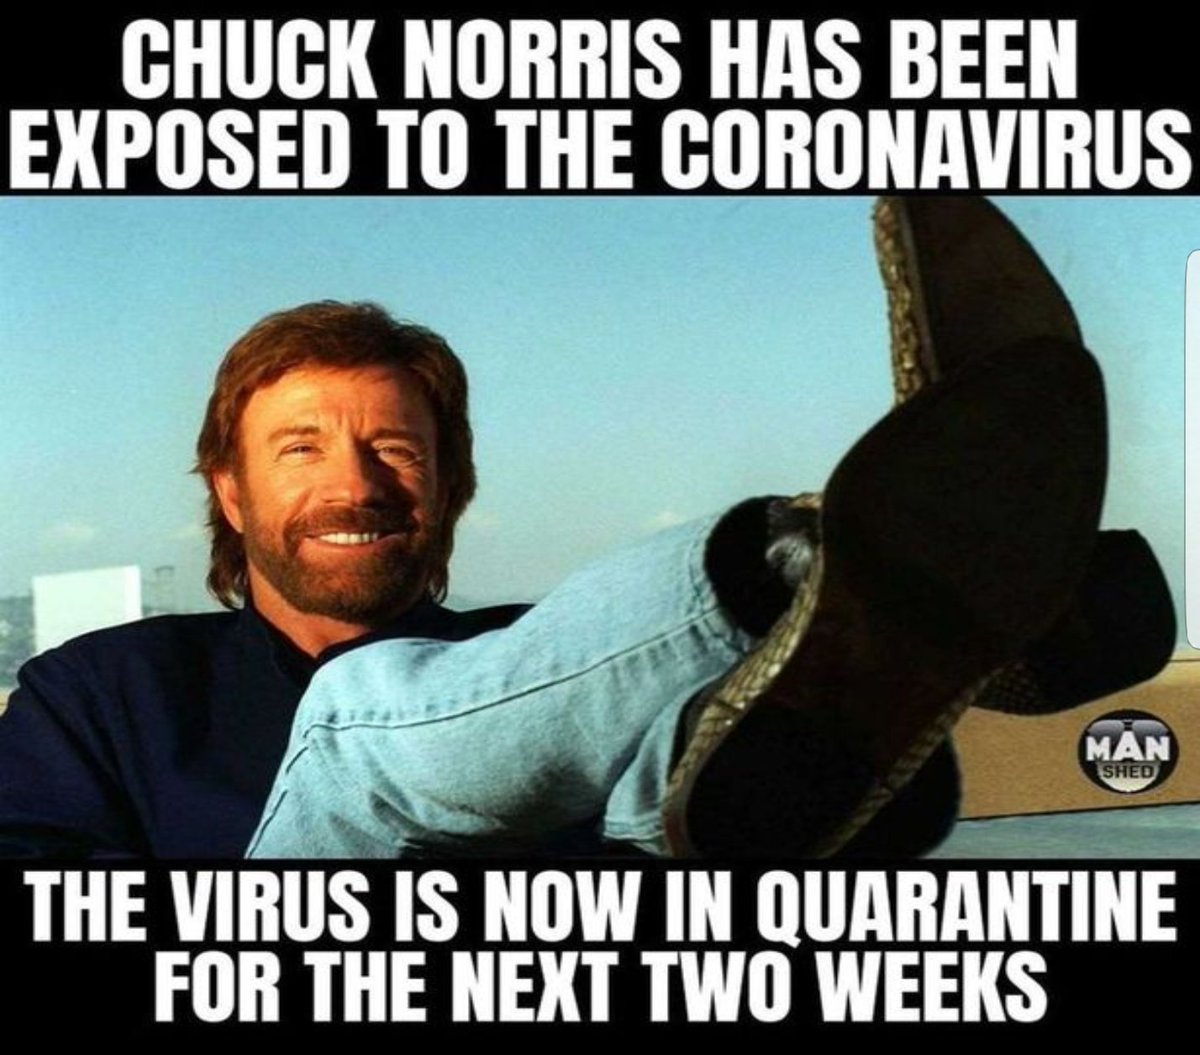 Chuck Norris who has deep Cherokee roots and was raised in the Native American lands of Oklahoma and Kansas—thus making one know that if the coronavirus ever visits him—it won’t be Chuck Norris who’s put in quarantine.    #COVID19  http://www.whatdoesitmean.com/index3187.htm 